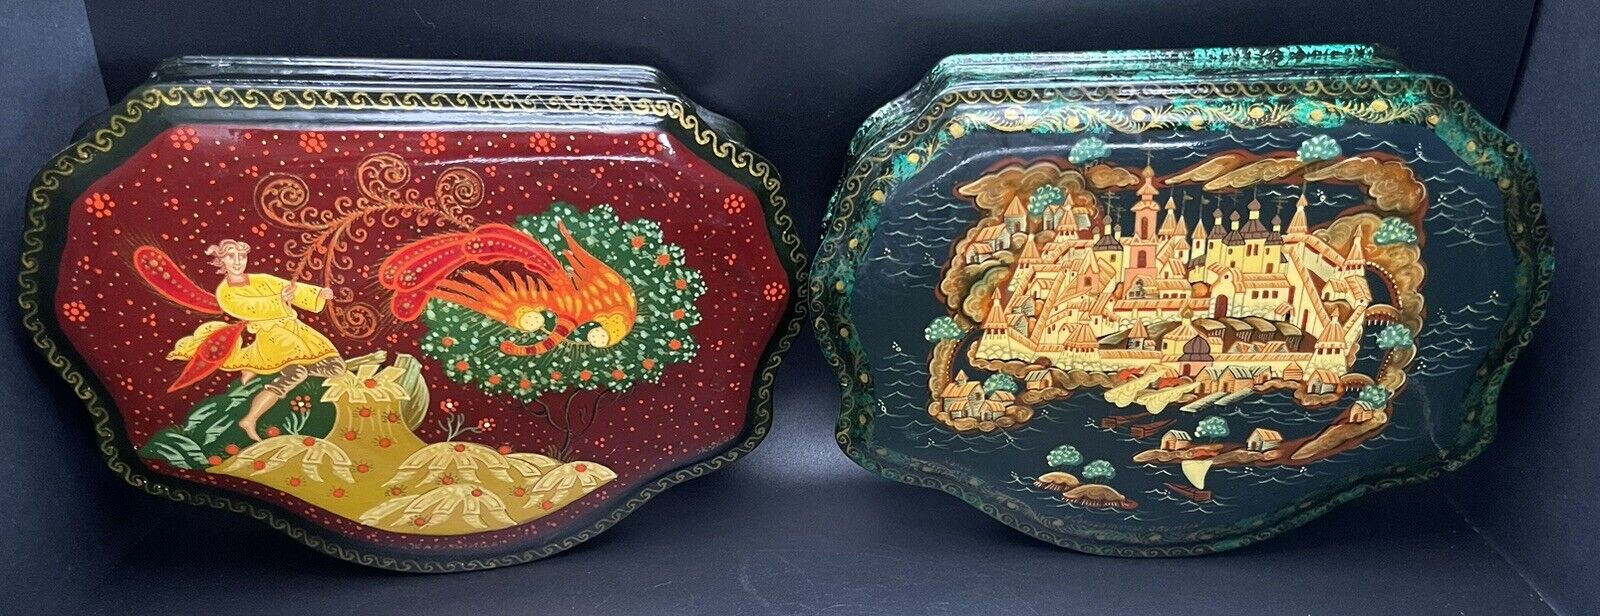 Lot of 2 Vintage Russian Lacquer Boxes